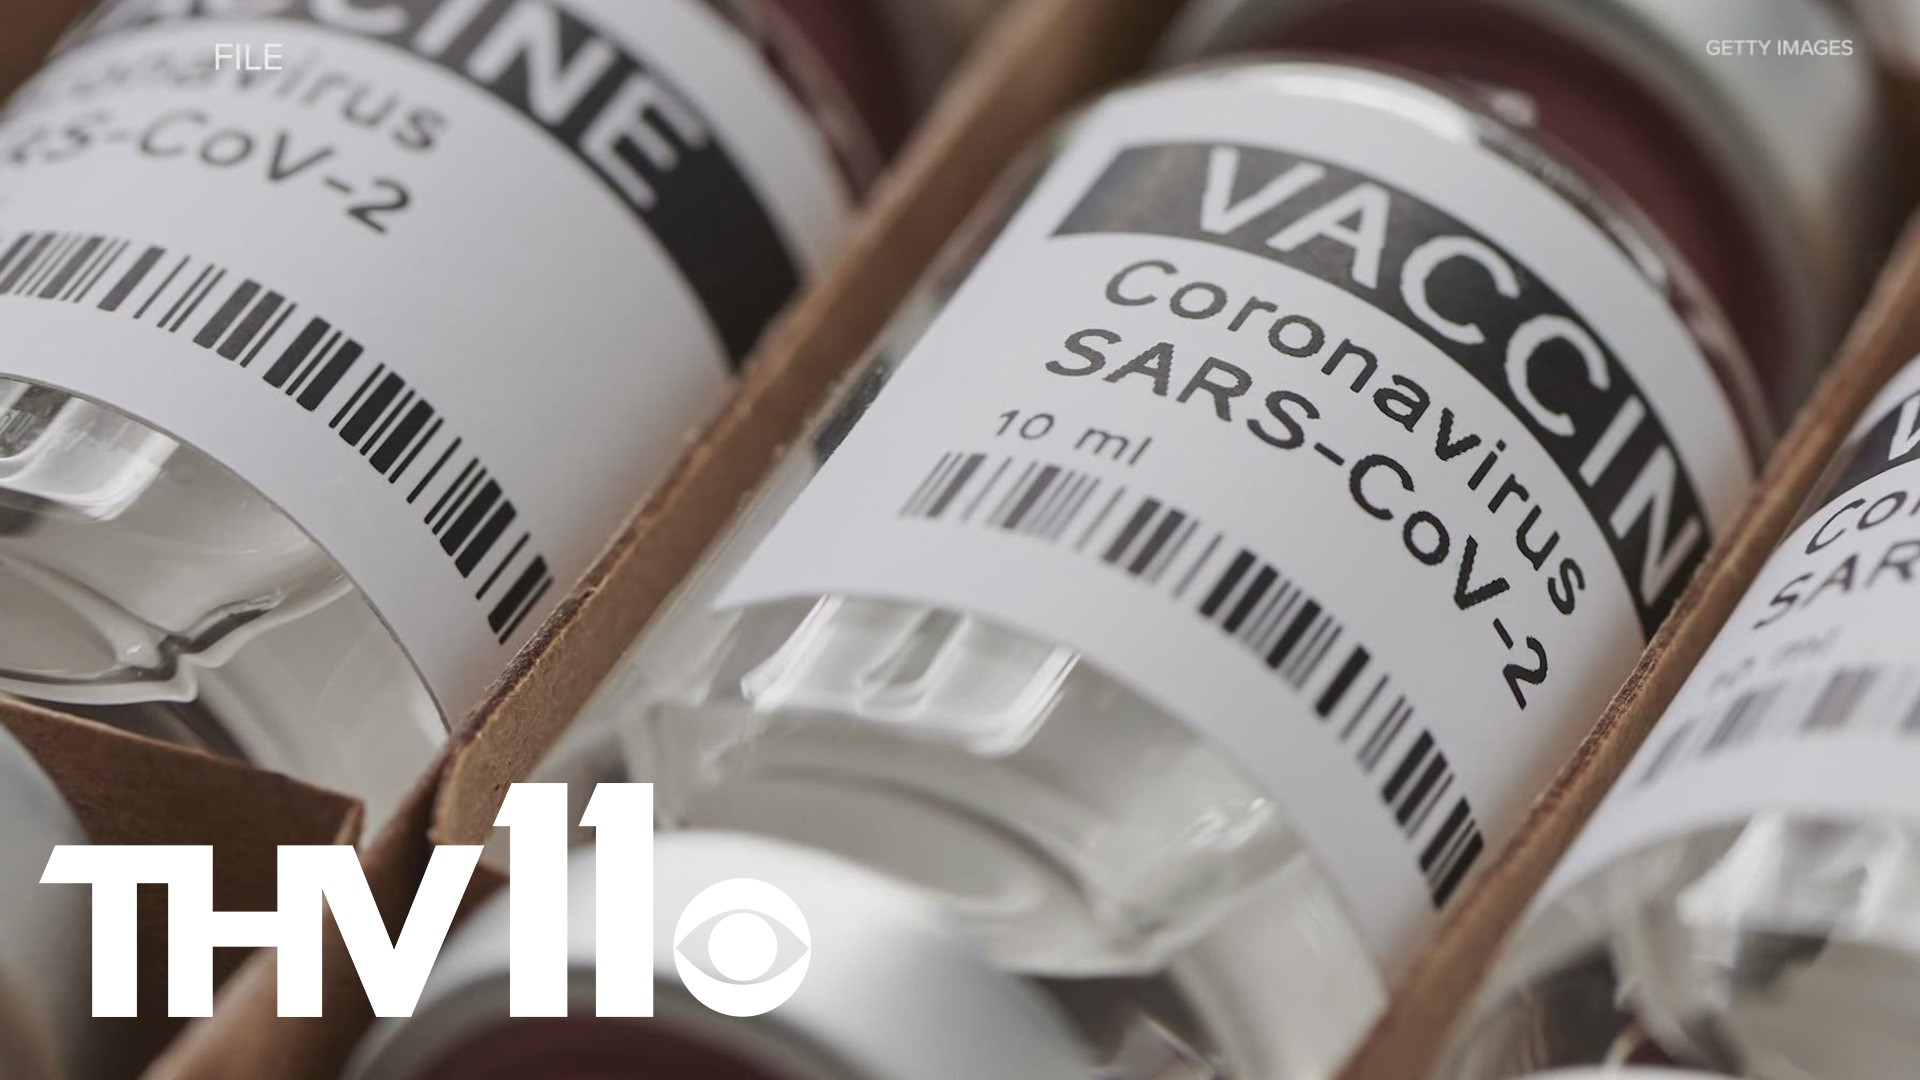 April 22 marked a goal that seemed impossible just four months ago – one million Arkansans have now gotten their first shot of the COVID-19 vaccine.